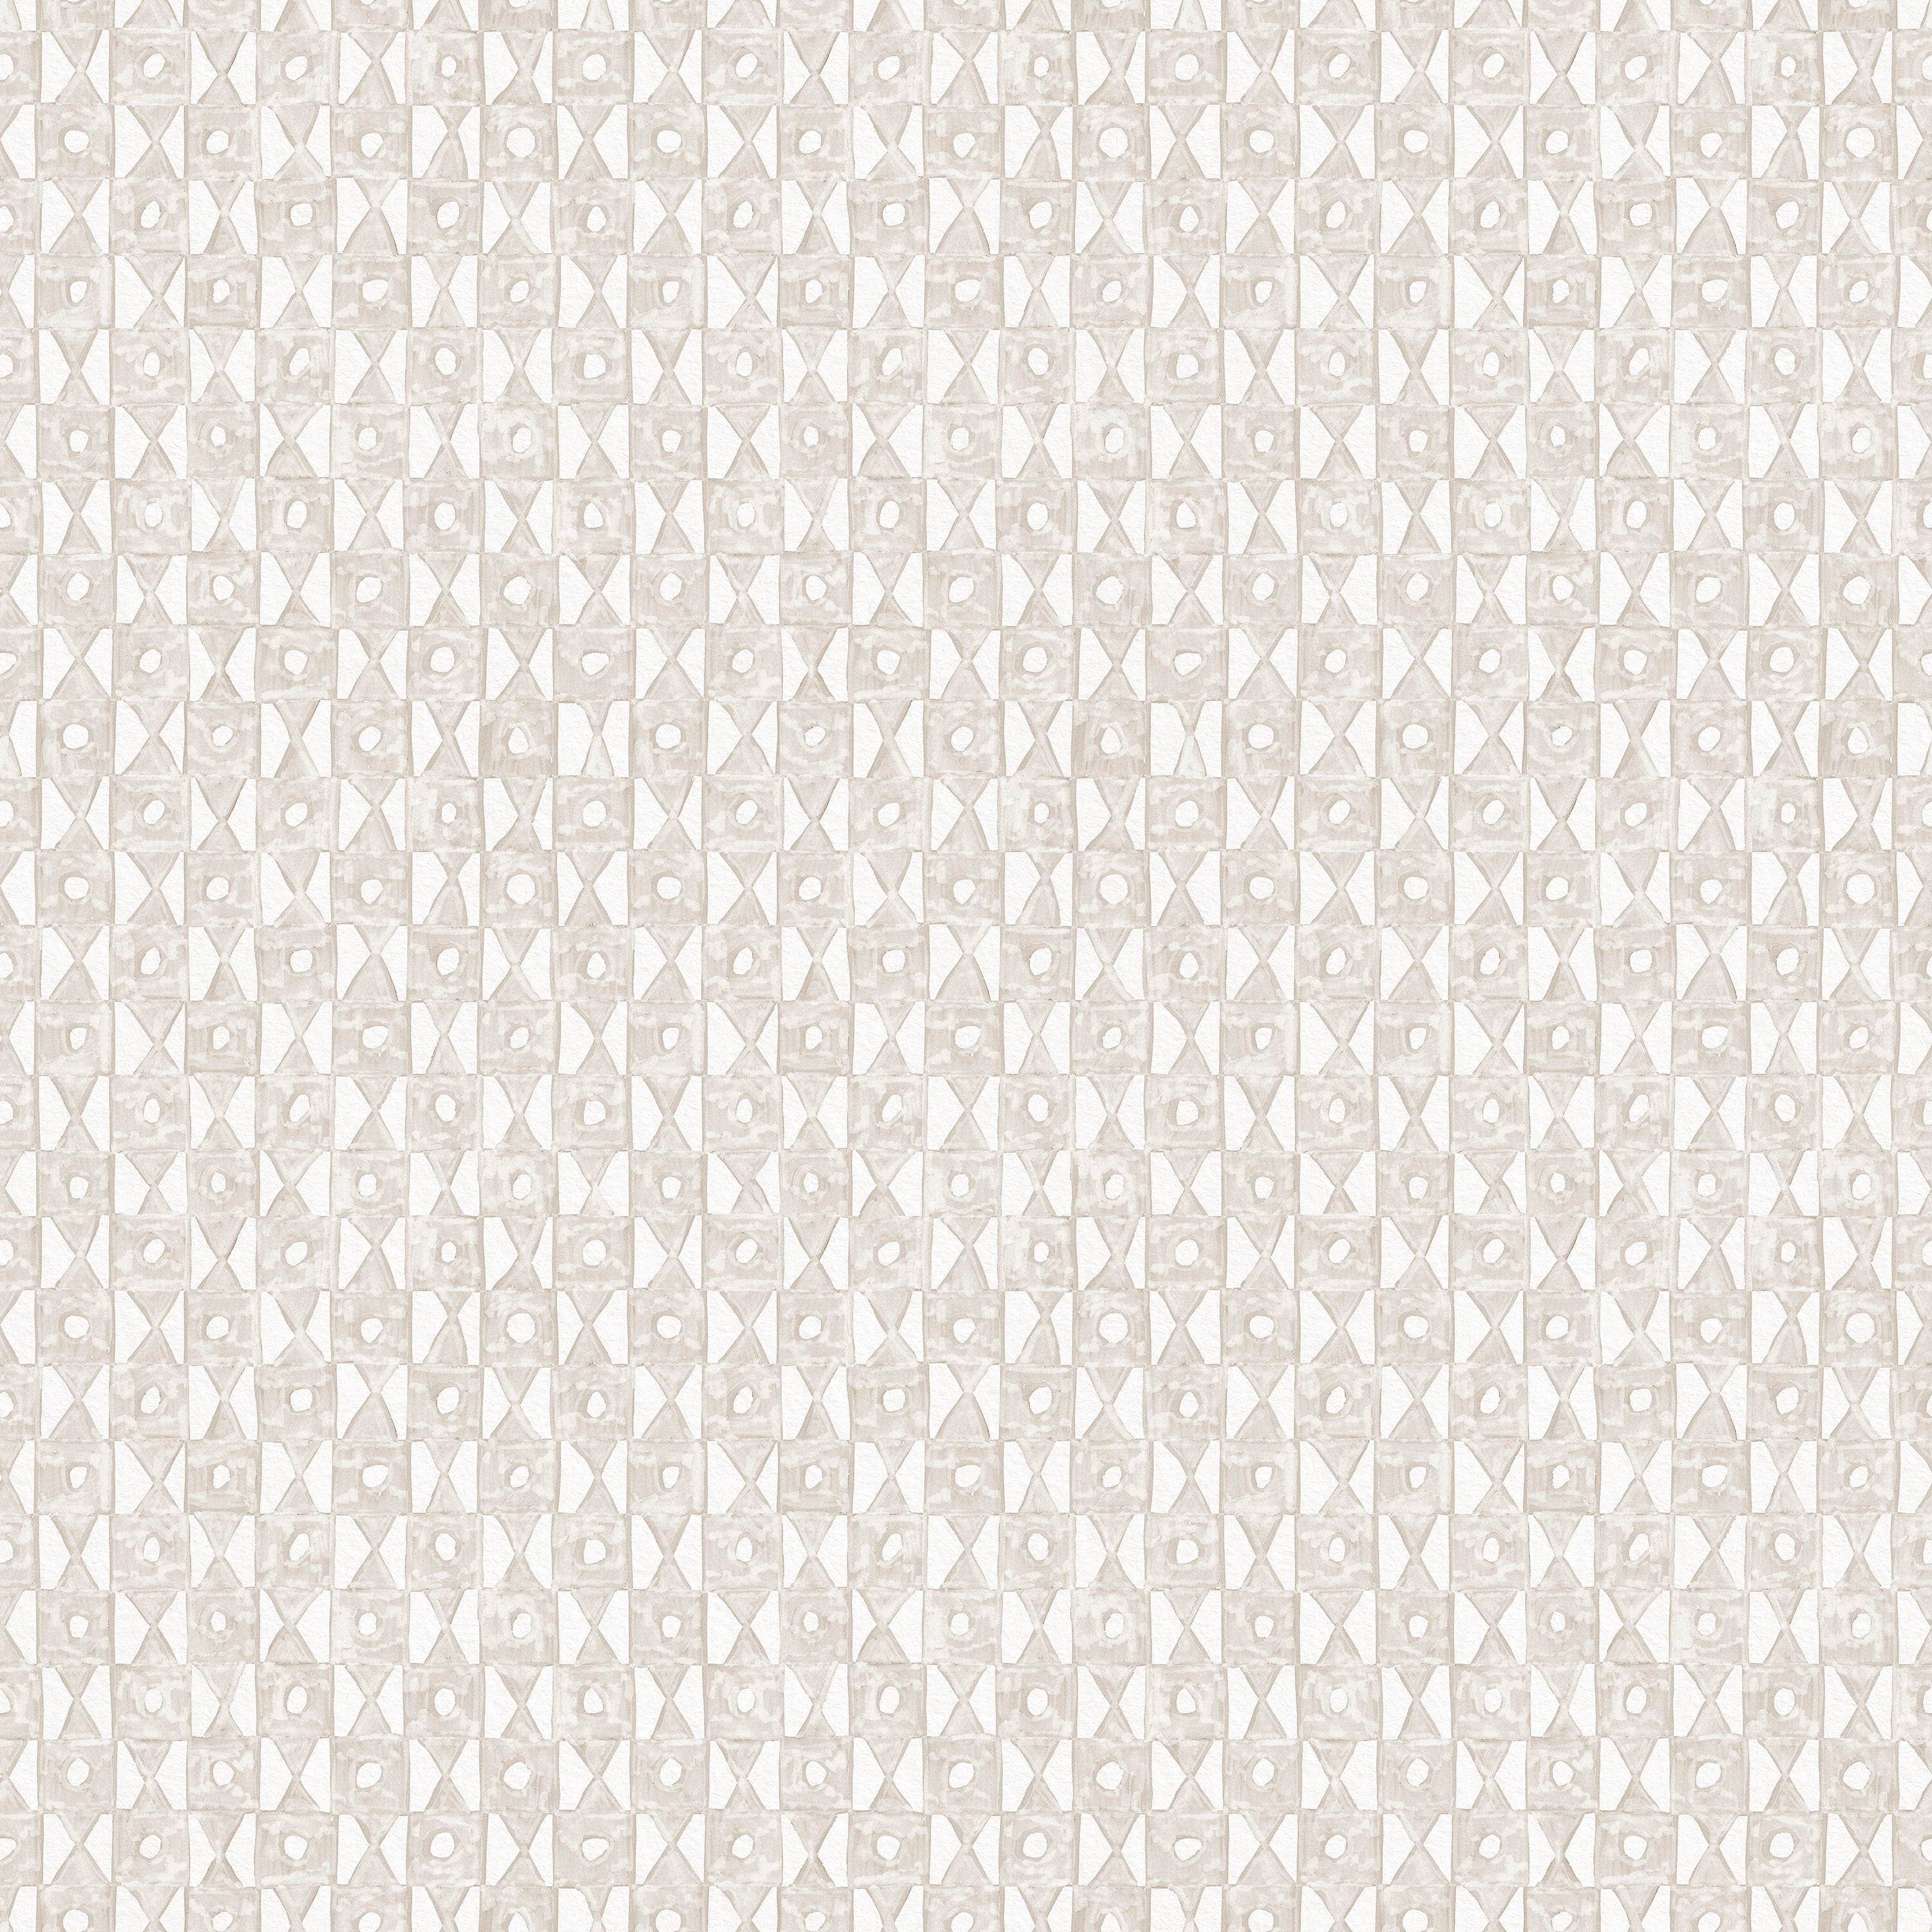 Detail of wallpaper in a geometric grid print in cream on a white field.